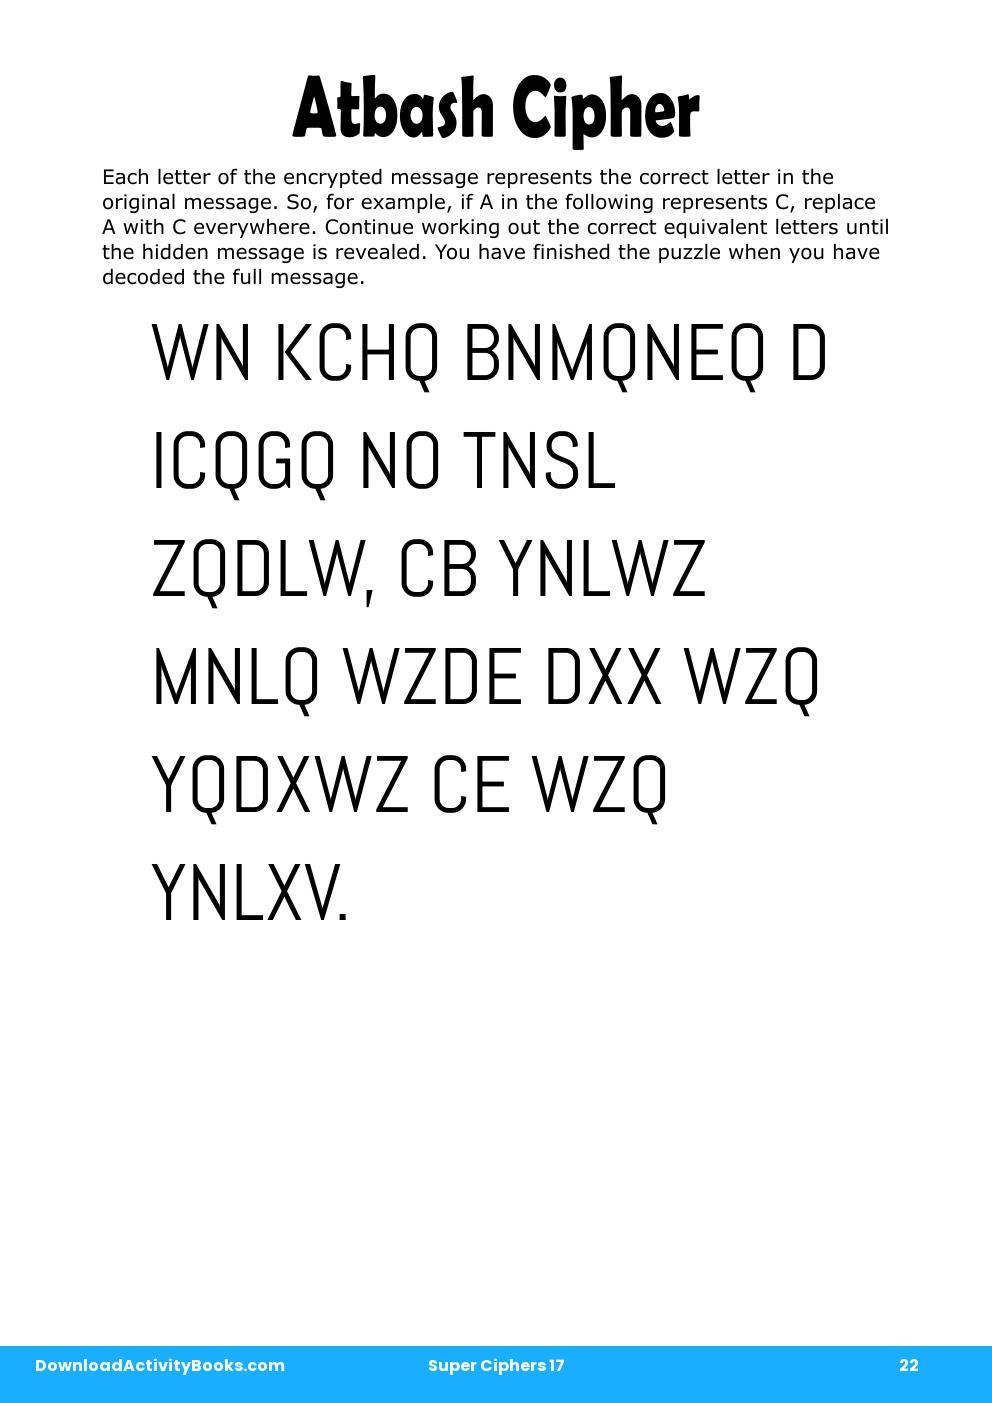 Atbash Cipher in Super Ciphers 17